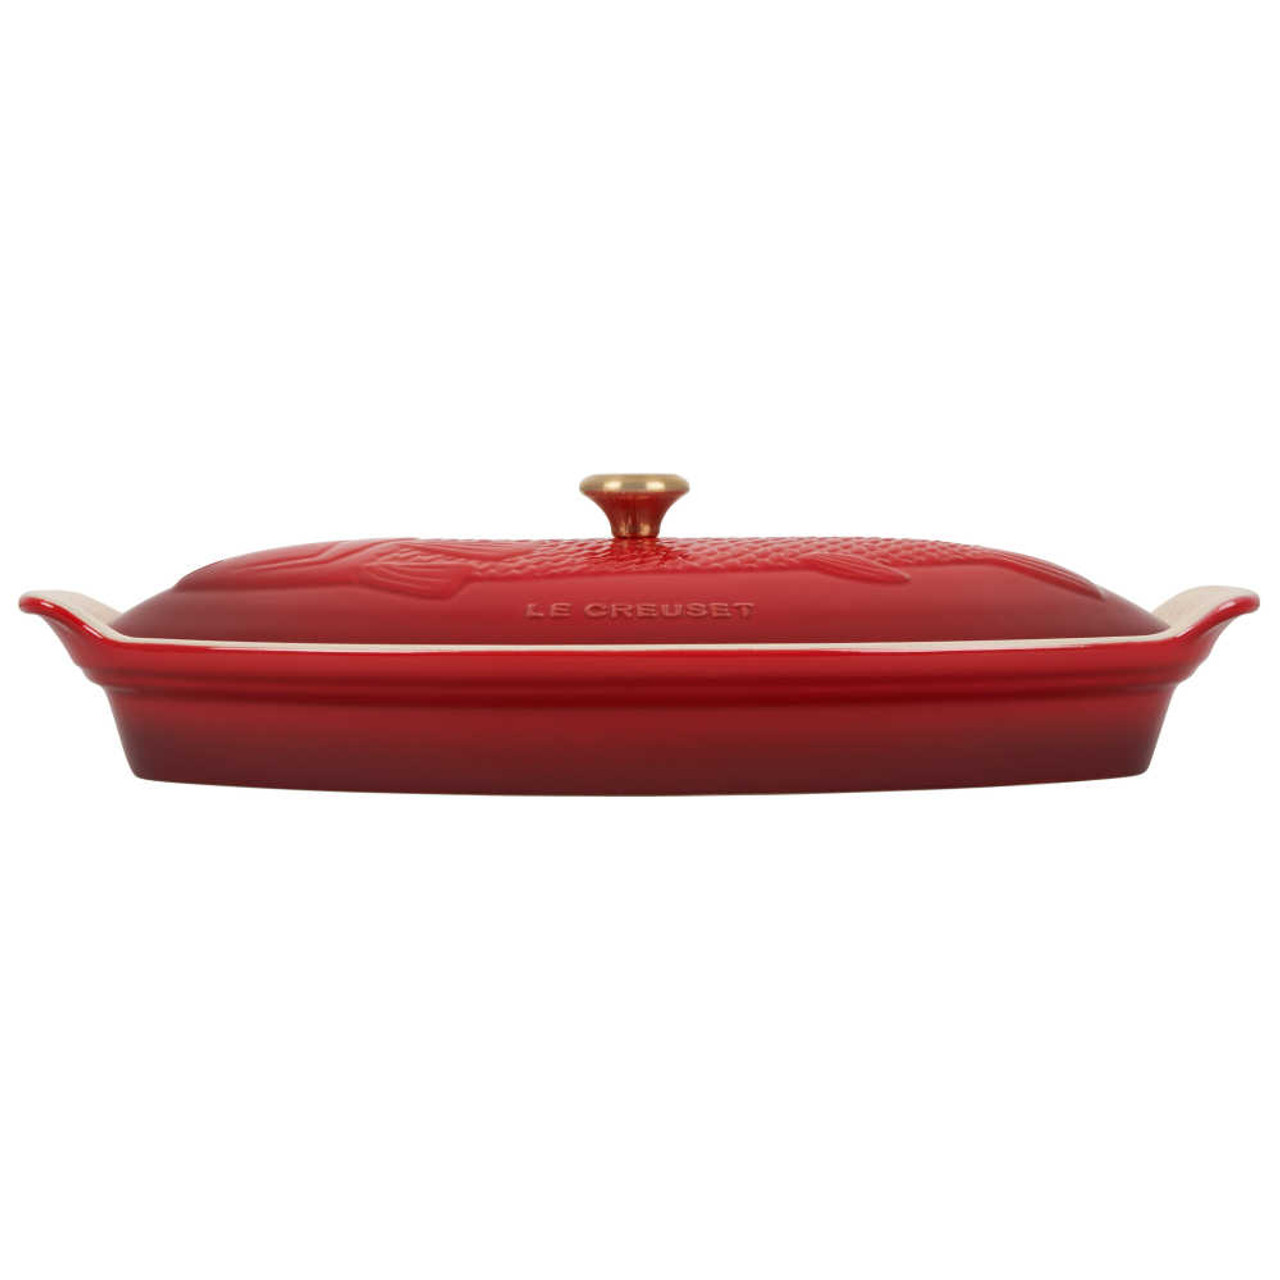 https://cdn11.bigcommerce.com/s-hccytny0od/images/stencil/1280x1280/products/5521/24072/Le_Creuset_Fish_Baker_in_Cerise_3__56593.1688764300.jpg?c=2?imbypass=on